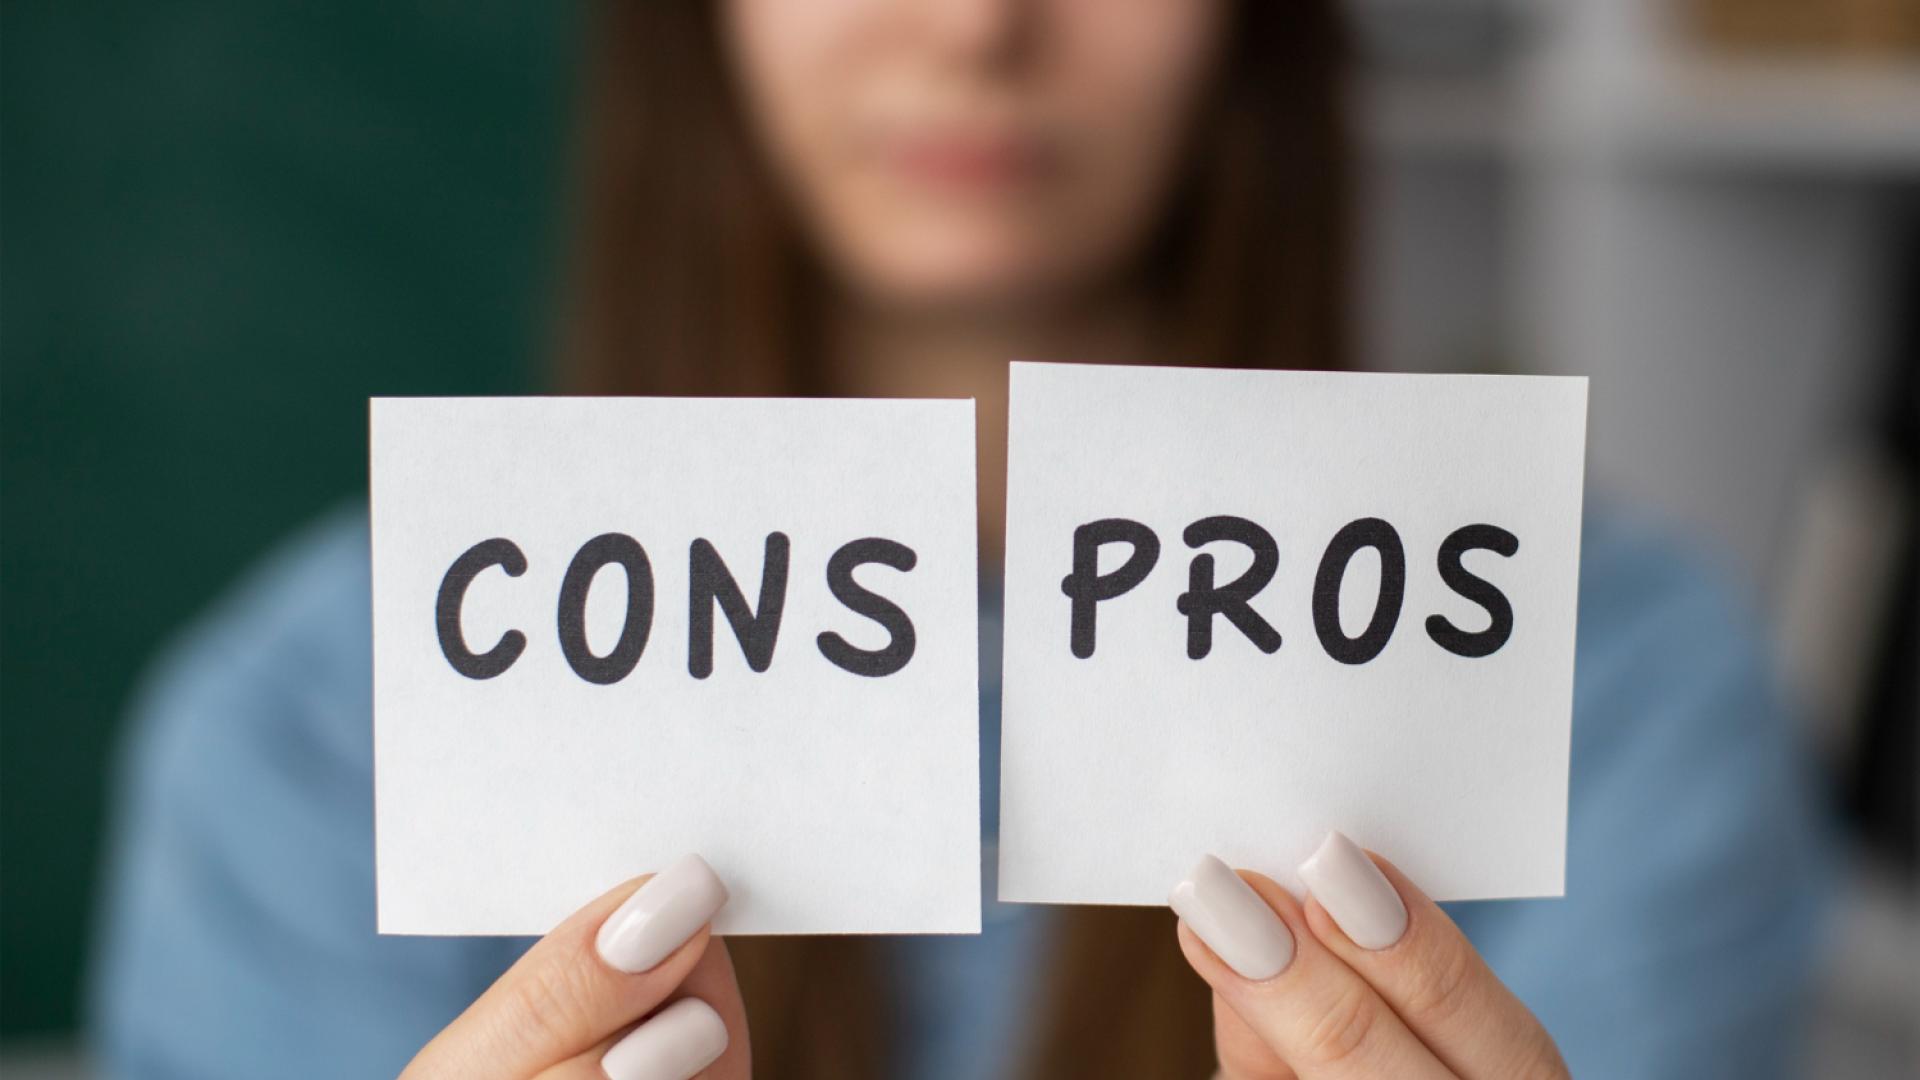 Blurry woman holds pros and cons post-its